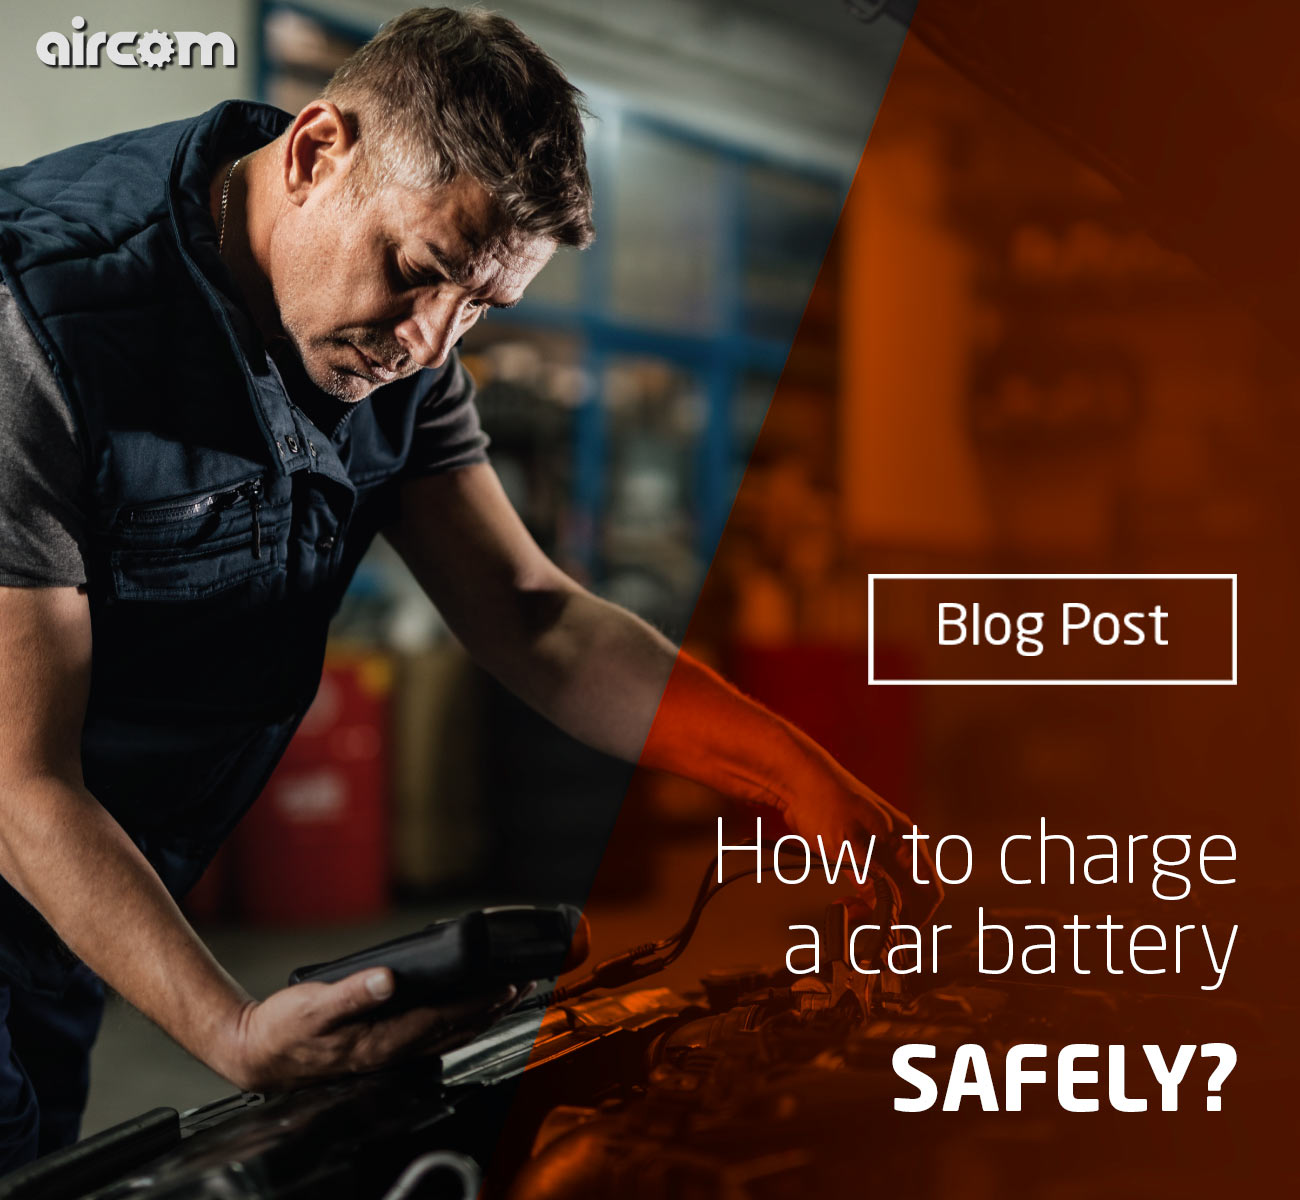 You are currently viewing How to safely charge a car battery?